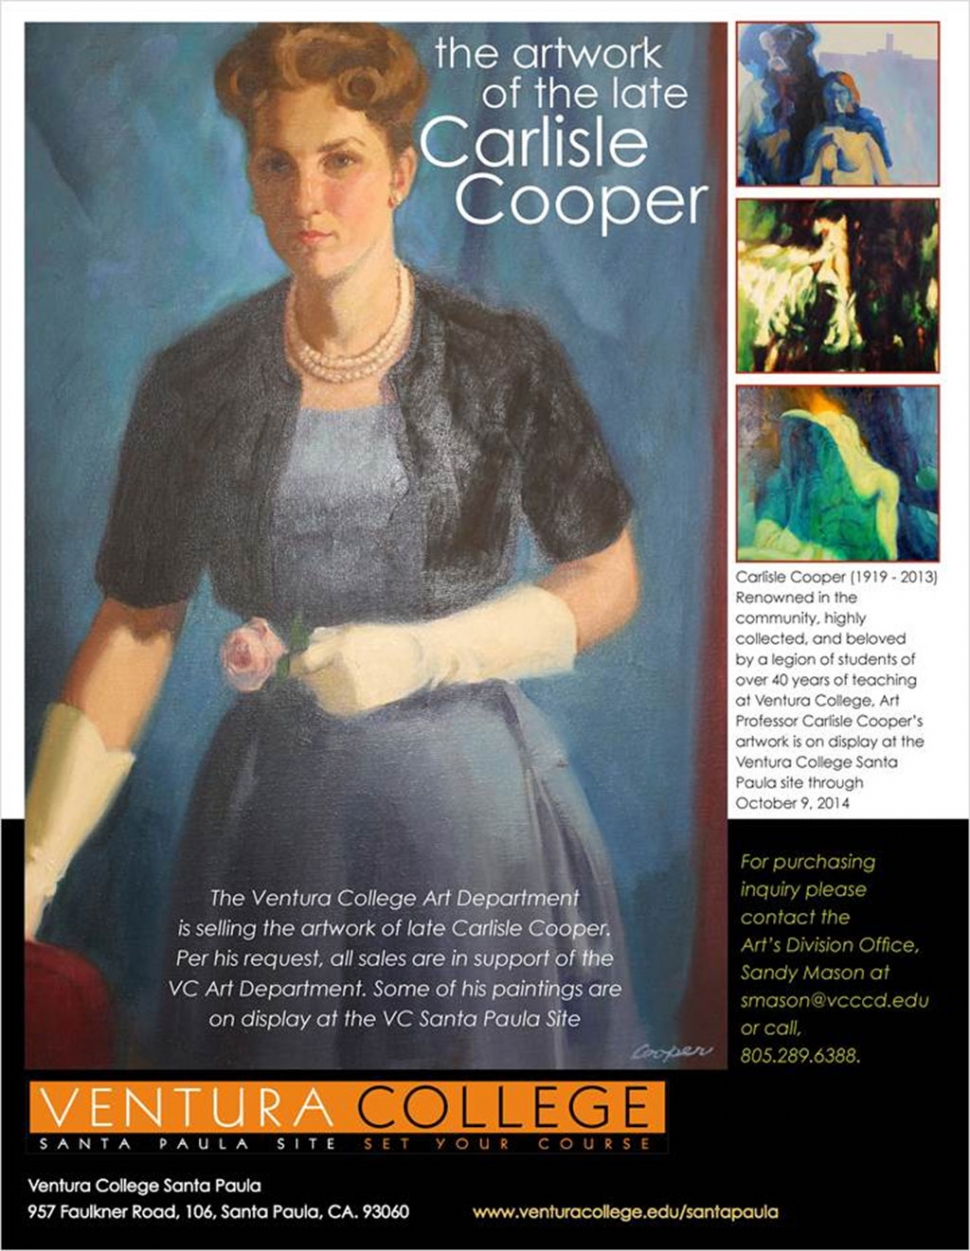 Carlisle Cooper (1919-2013),  renowned in the community, highly collected, and beloved by a legion of students of over 40 years of teaching at Ventura College. The Ventura College Art Department is selling the artwork of the late Carlisle Cooper. Per his request, all sales are in support of the VC Art Department. Some of his paintings are on display at the VC Santa Paula Site.  Gallery hours are Monday through Thursday, 8:00 a.m. to 8:30 p.m.  The site is located at 957 Faulkner Road, 106, Santa Paula, CA 93060.